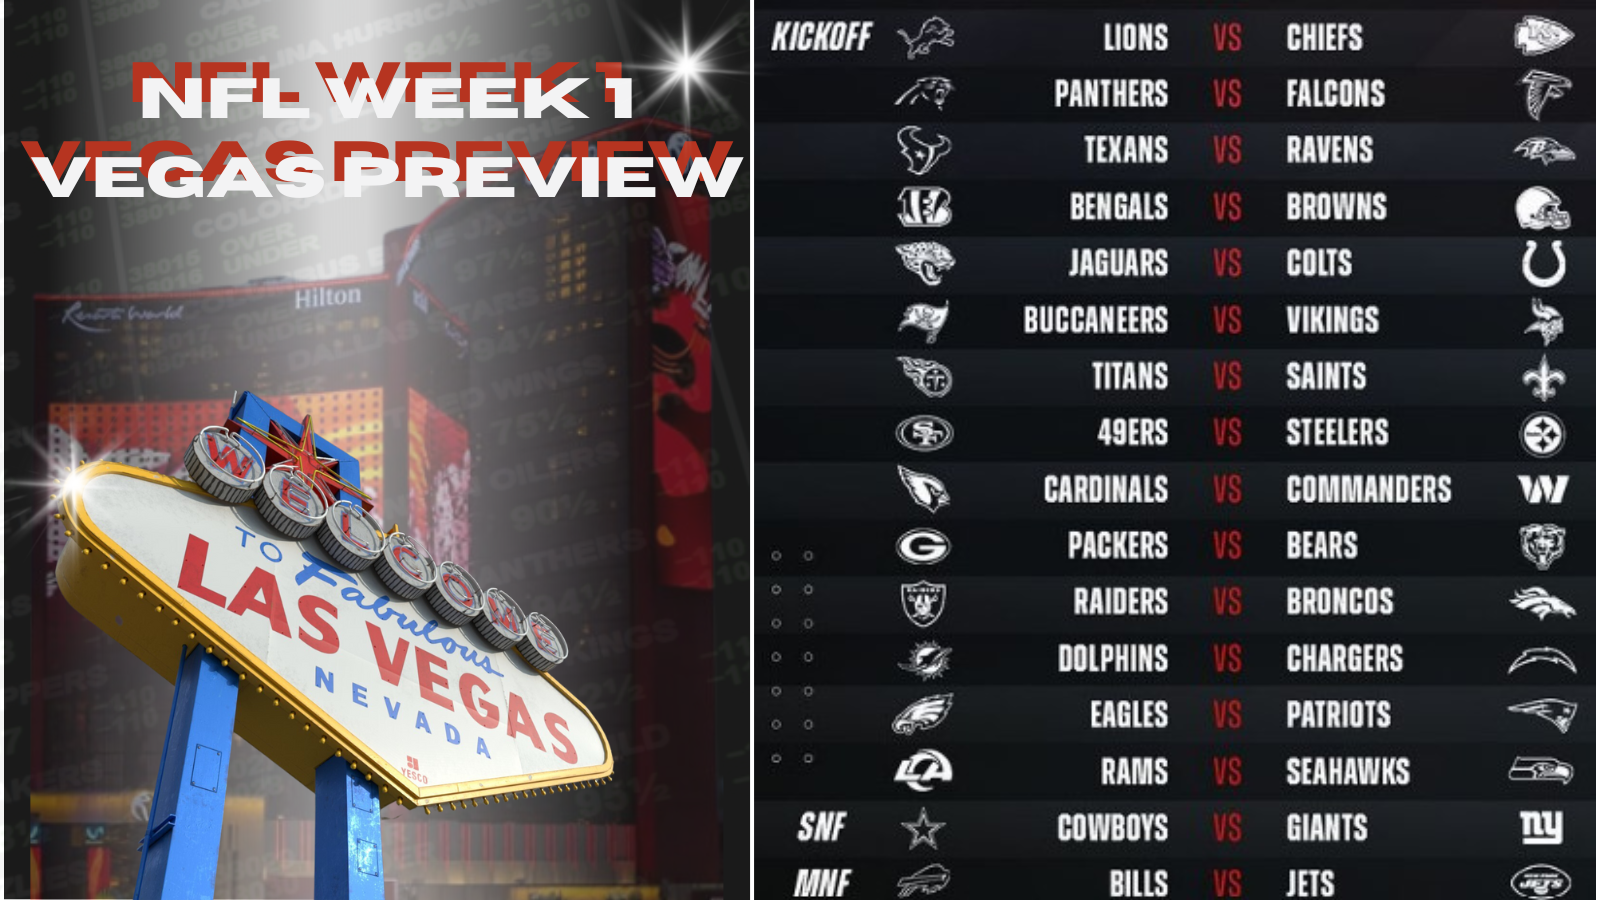 offers a first look at the slate for Week 1 to kickoff